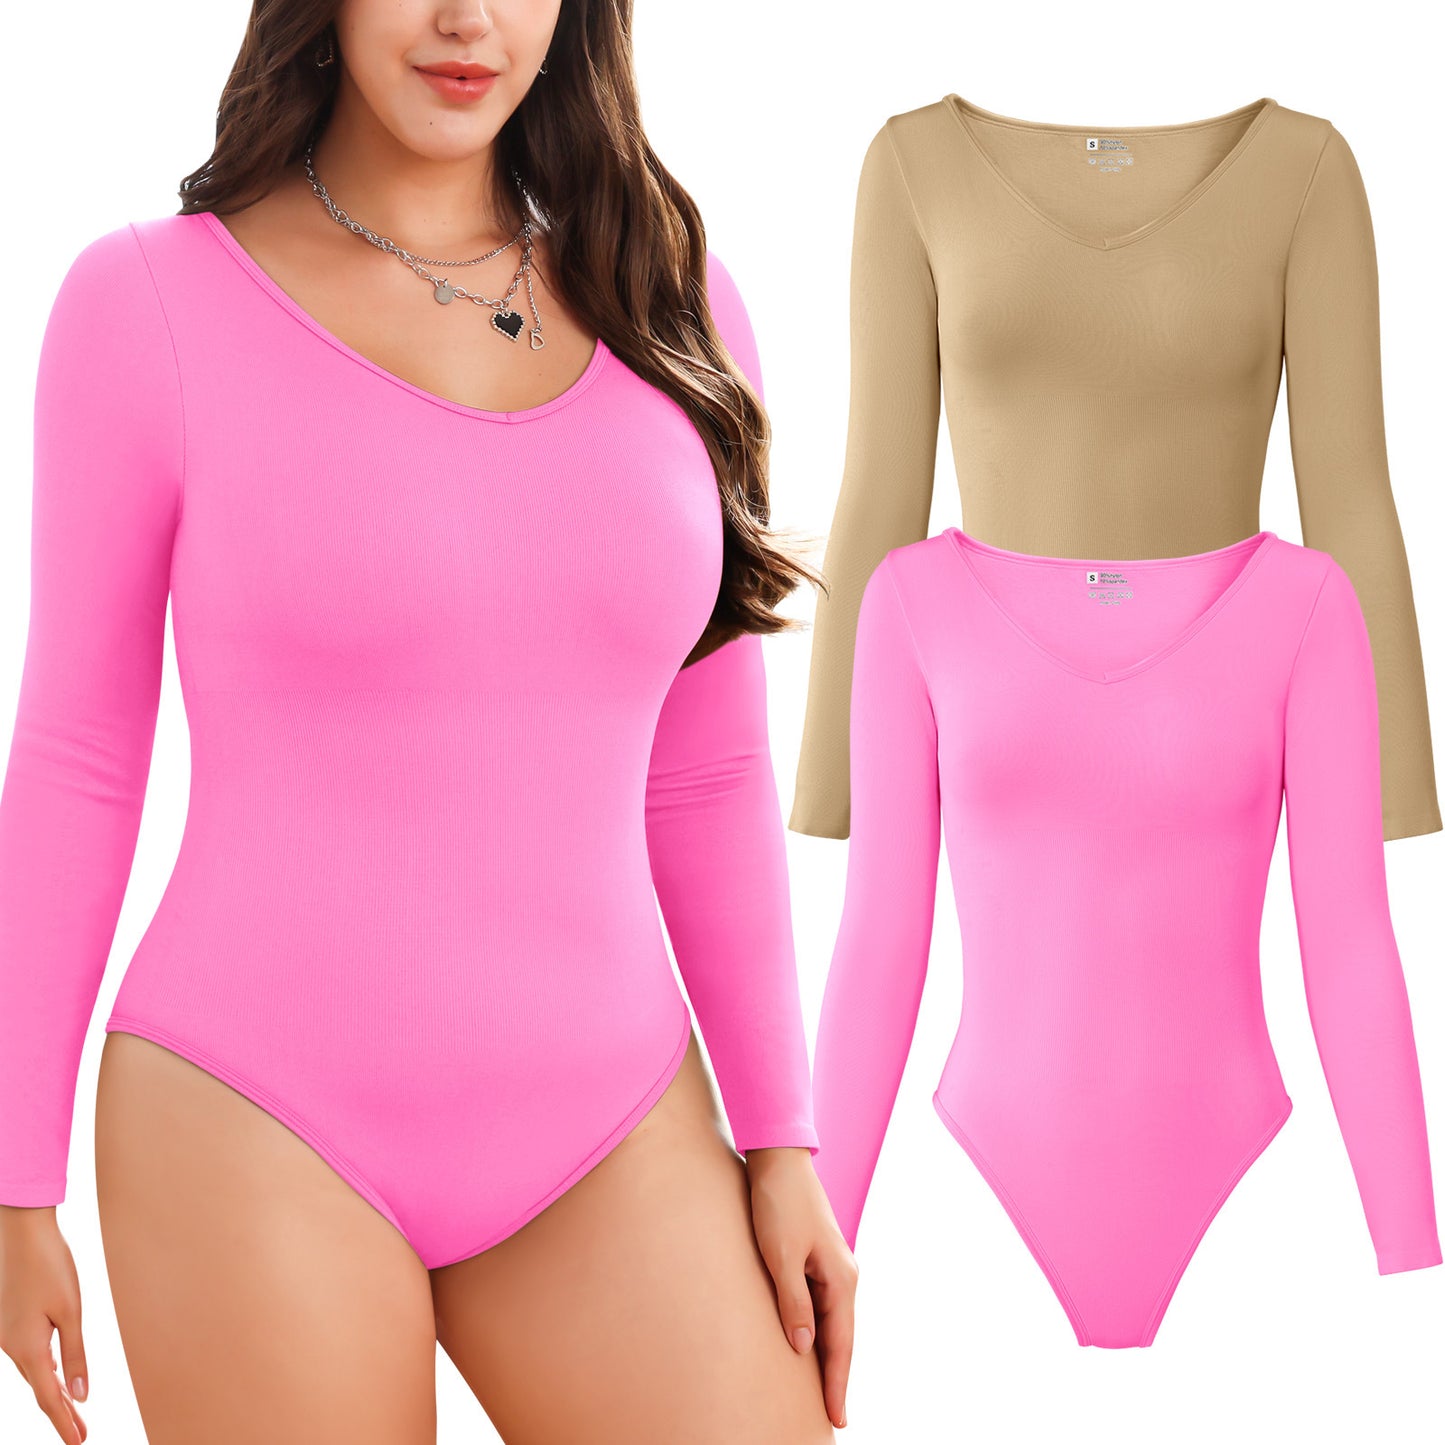 Women Long Sleeve Bodysuits 2 Pack, V Neck Sexy Tops with Ribbed Seamless Design